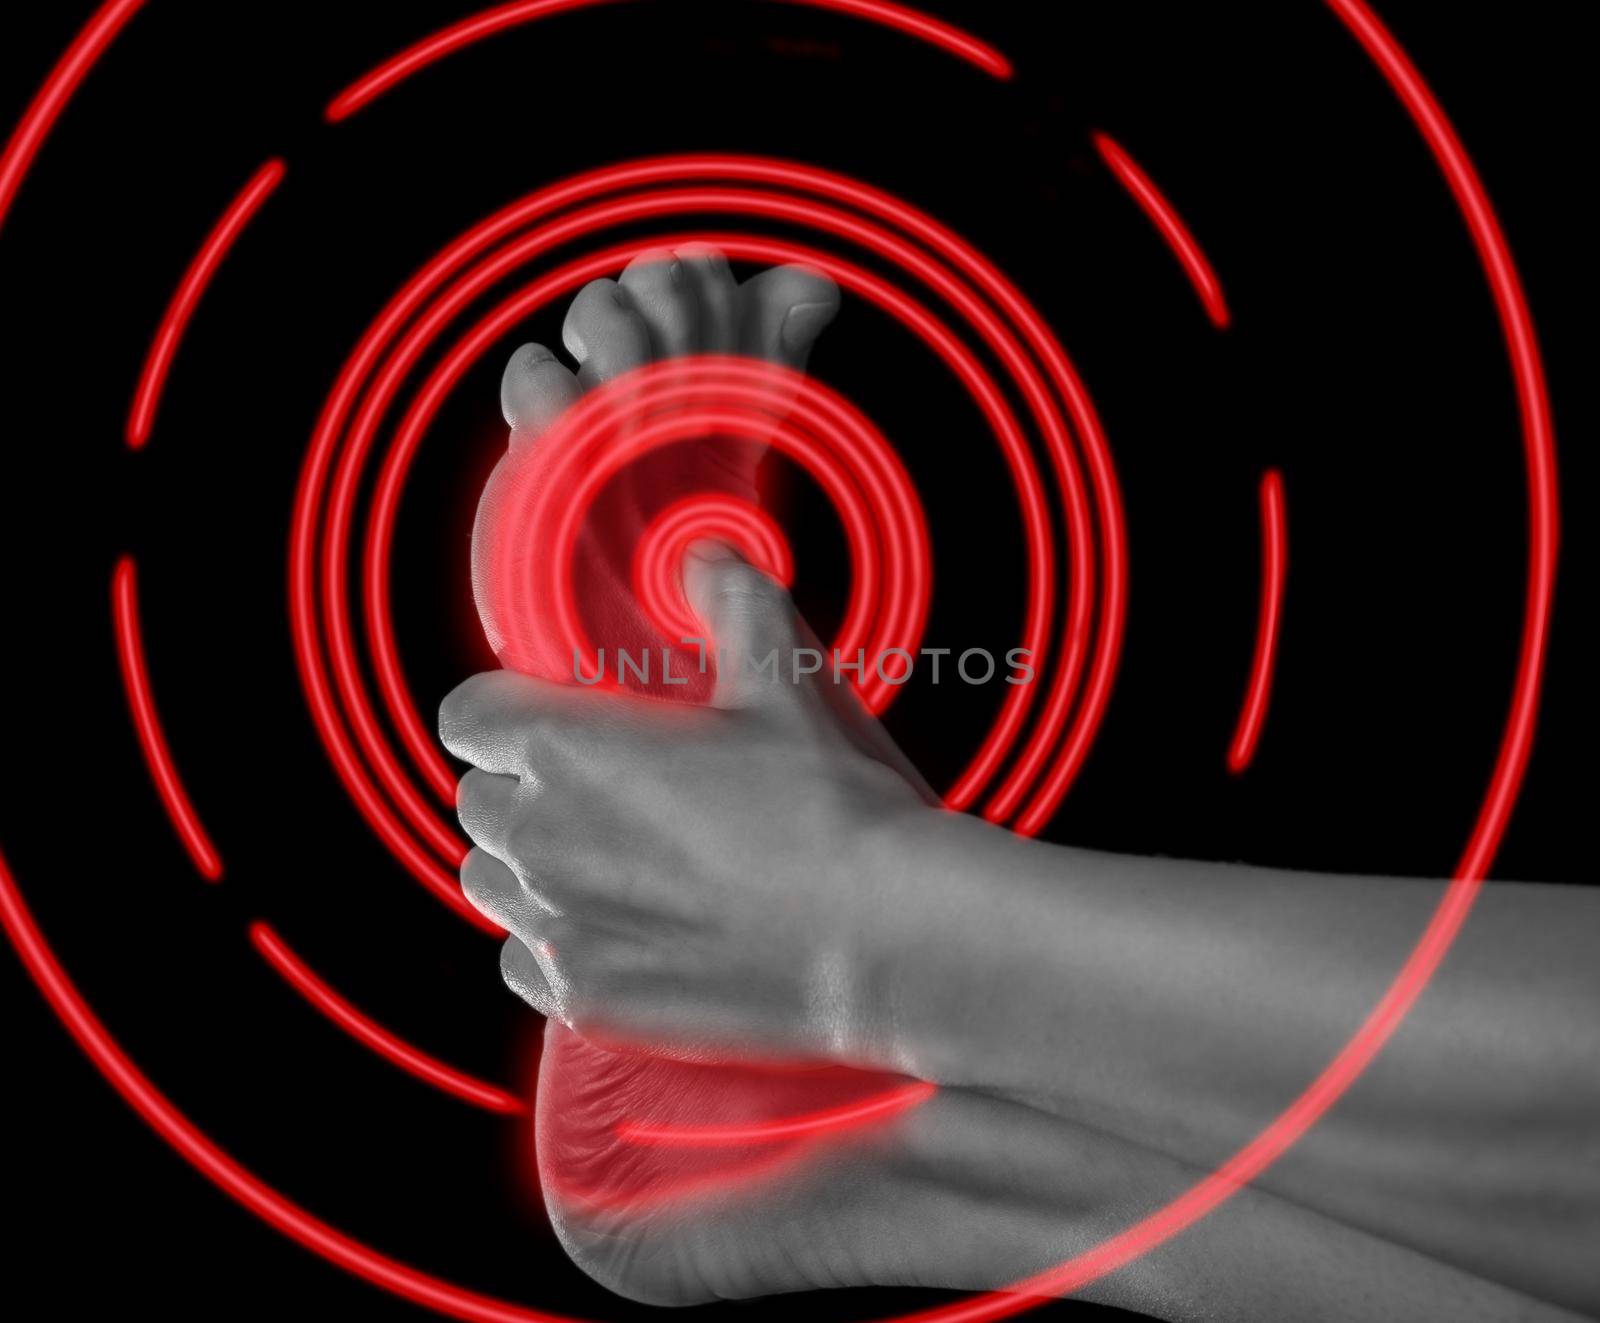 Woman holds her foot, pain in the foot, monochrome image, pain area of red color